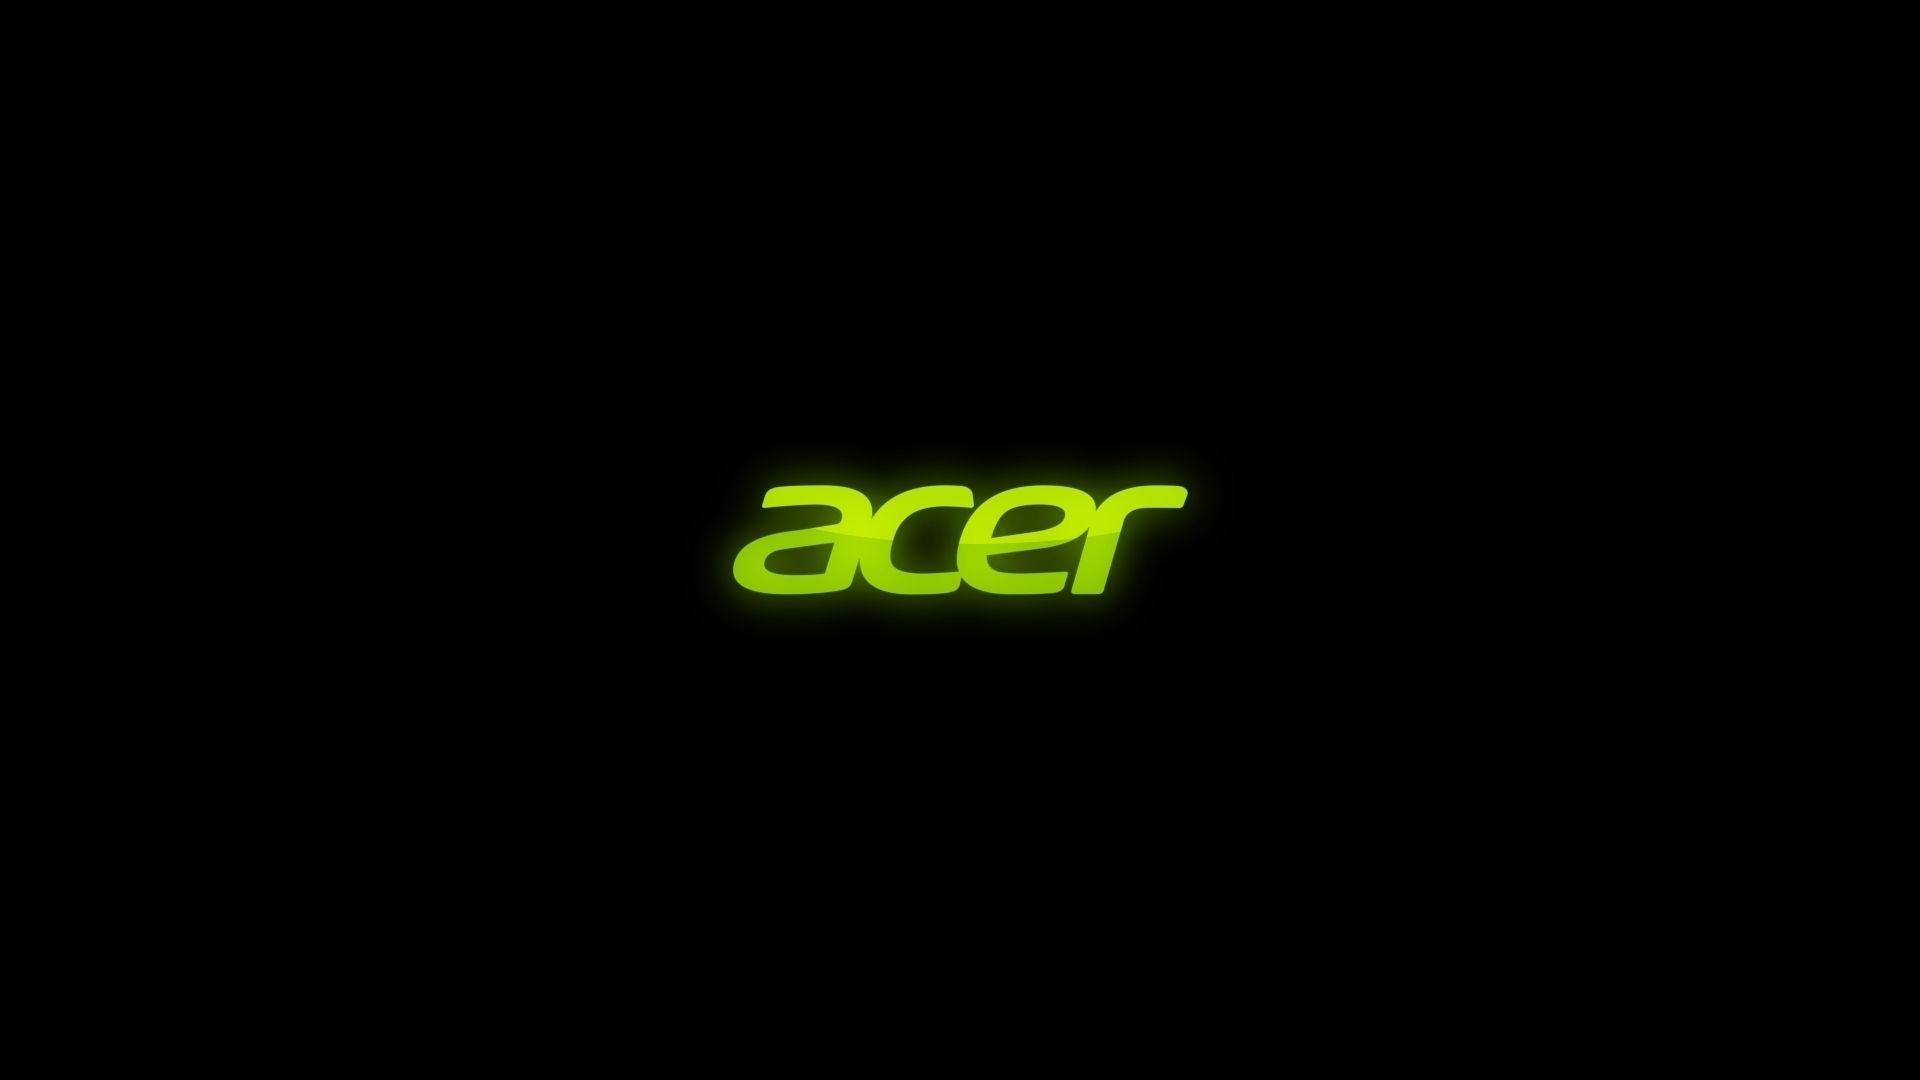 Acer&;s Widows 10 Smartphone to Be Unveiled Next Week